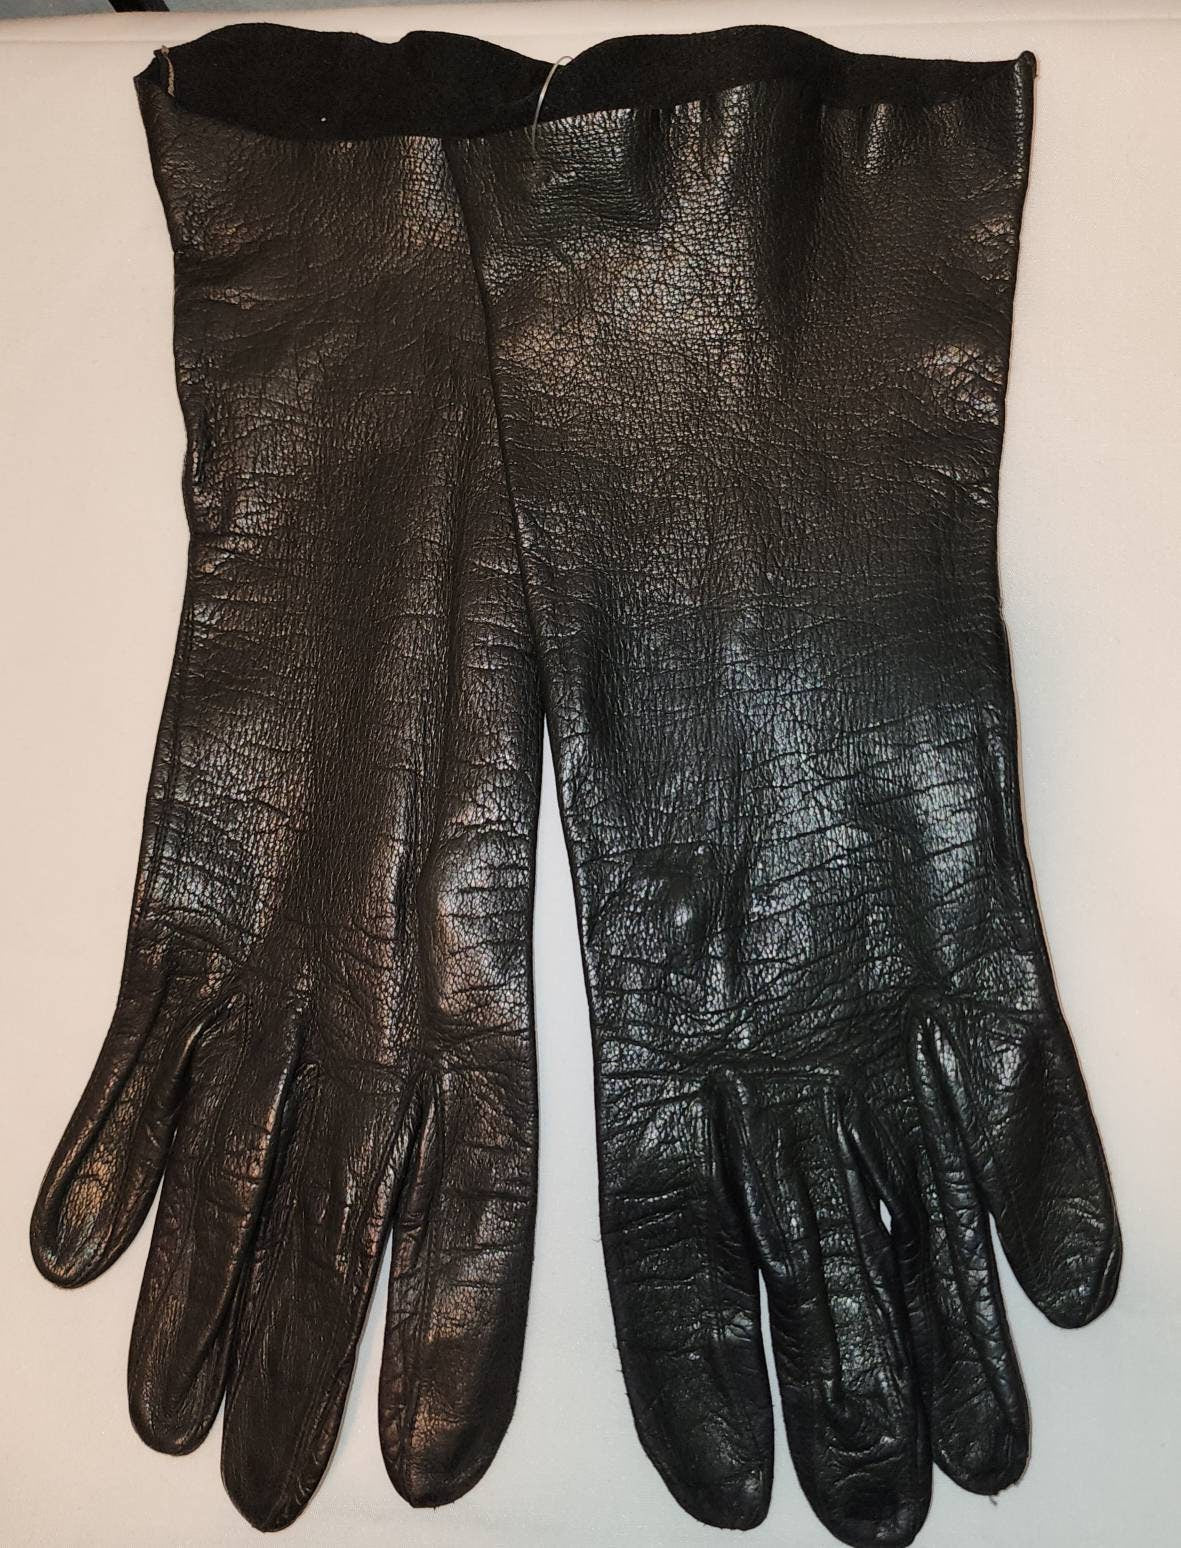 Vintage Leather Gloves 1950s Thin Black Midlength Leather Gloves Mid Century Rockabilly S